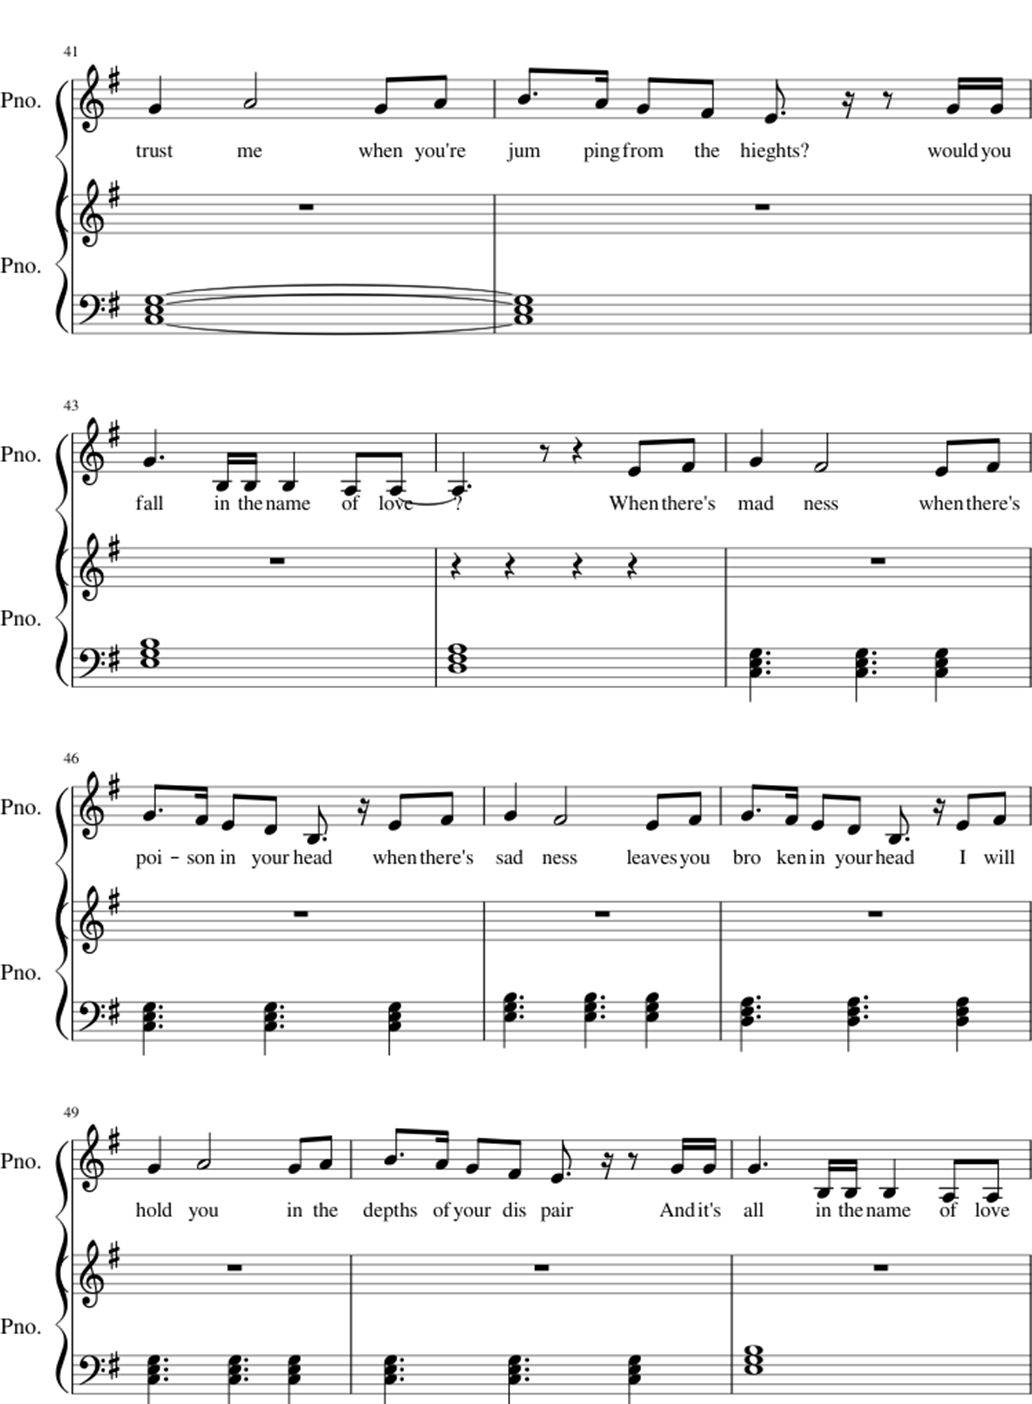 In the name of love sheet music notes 4